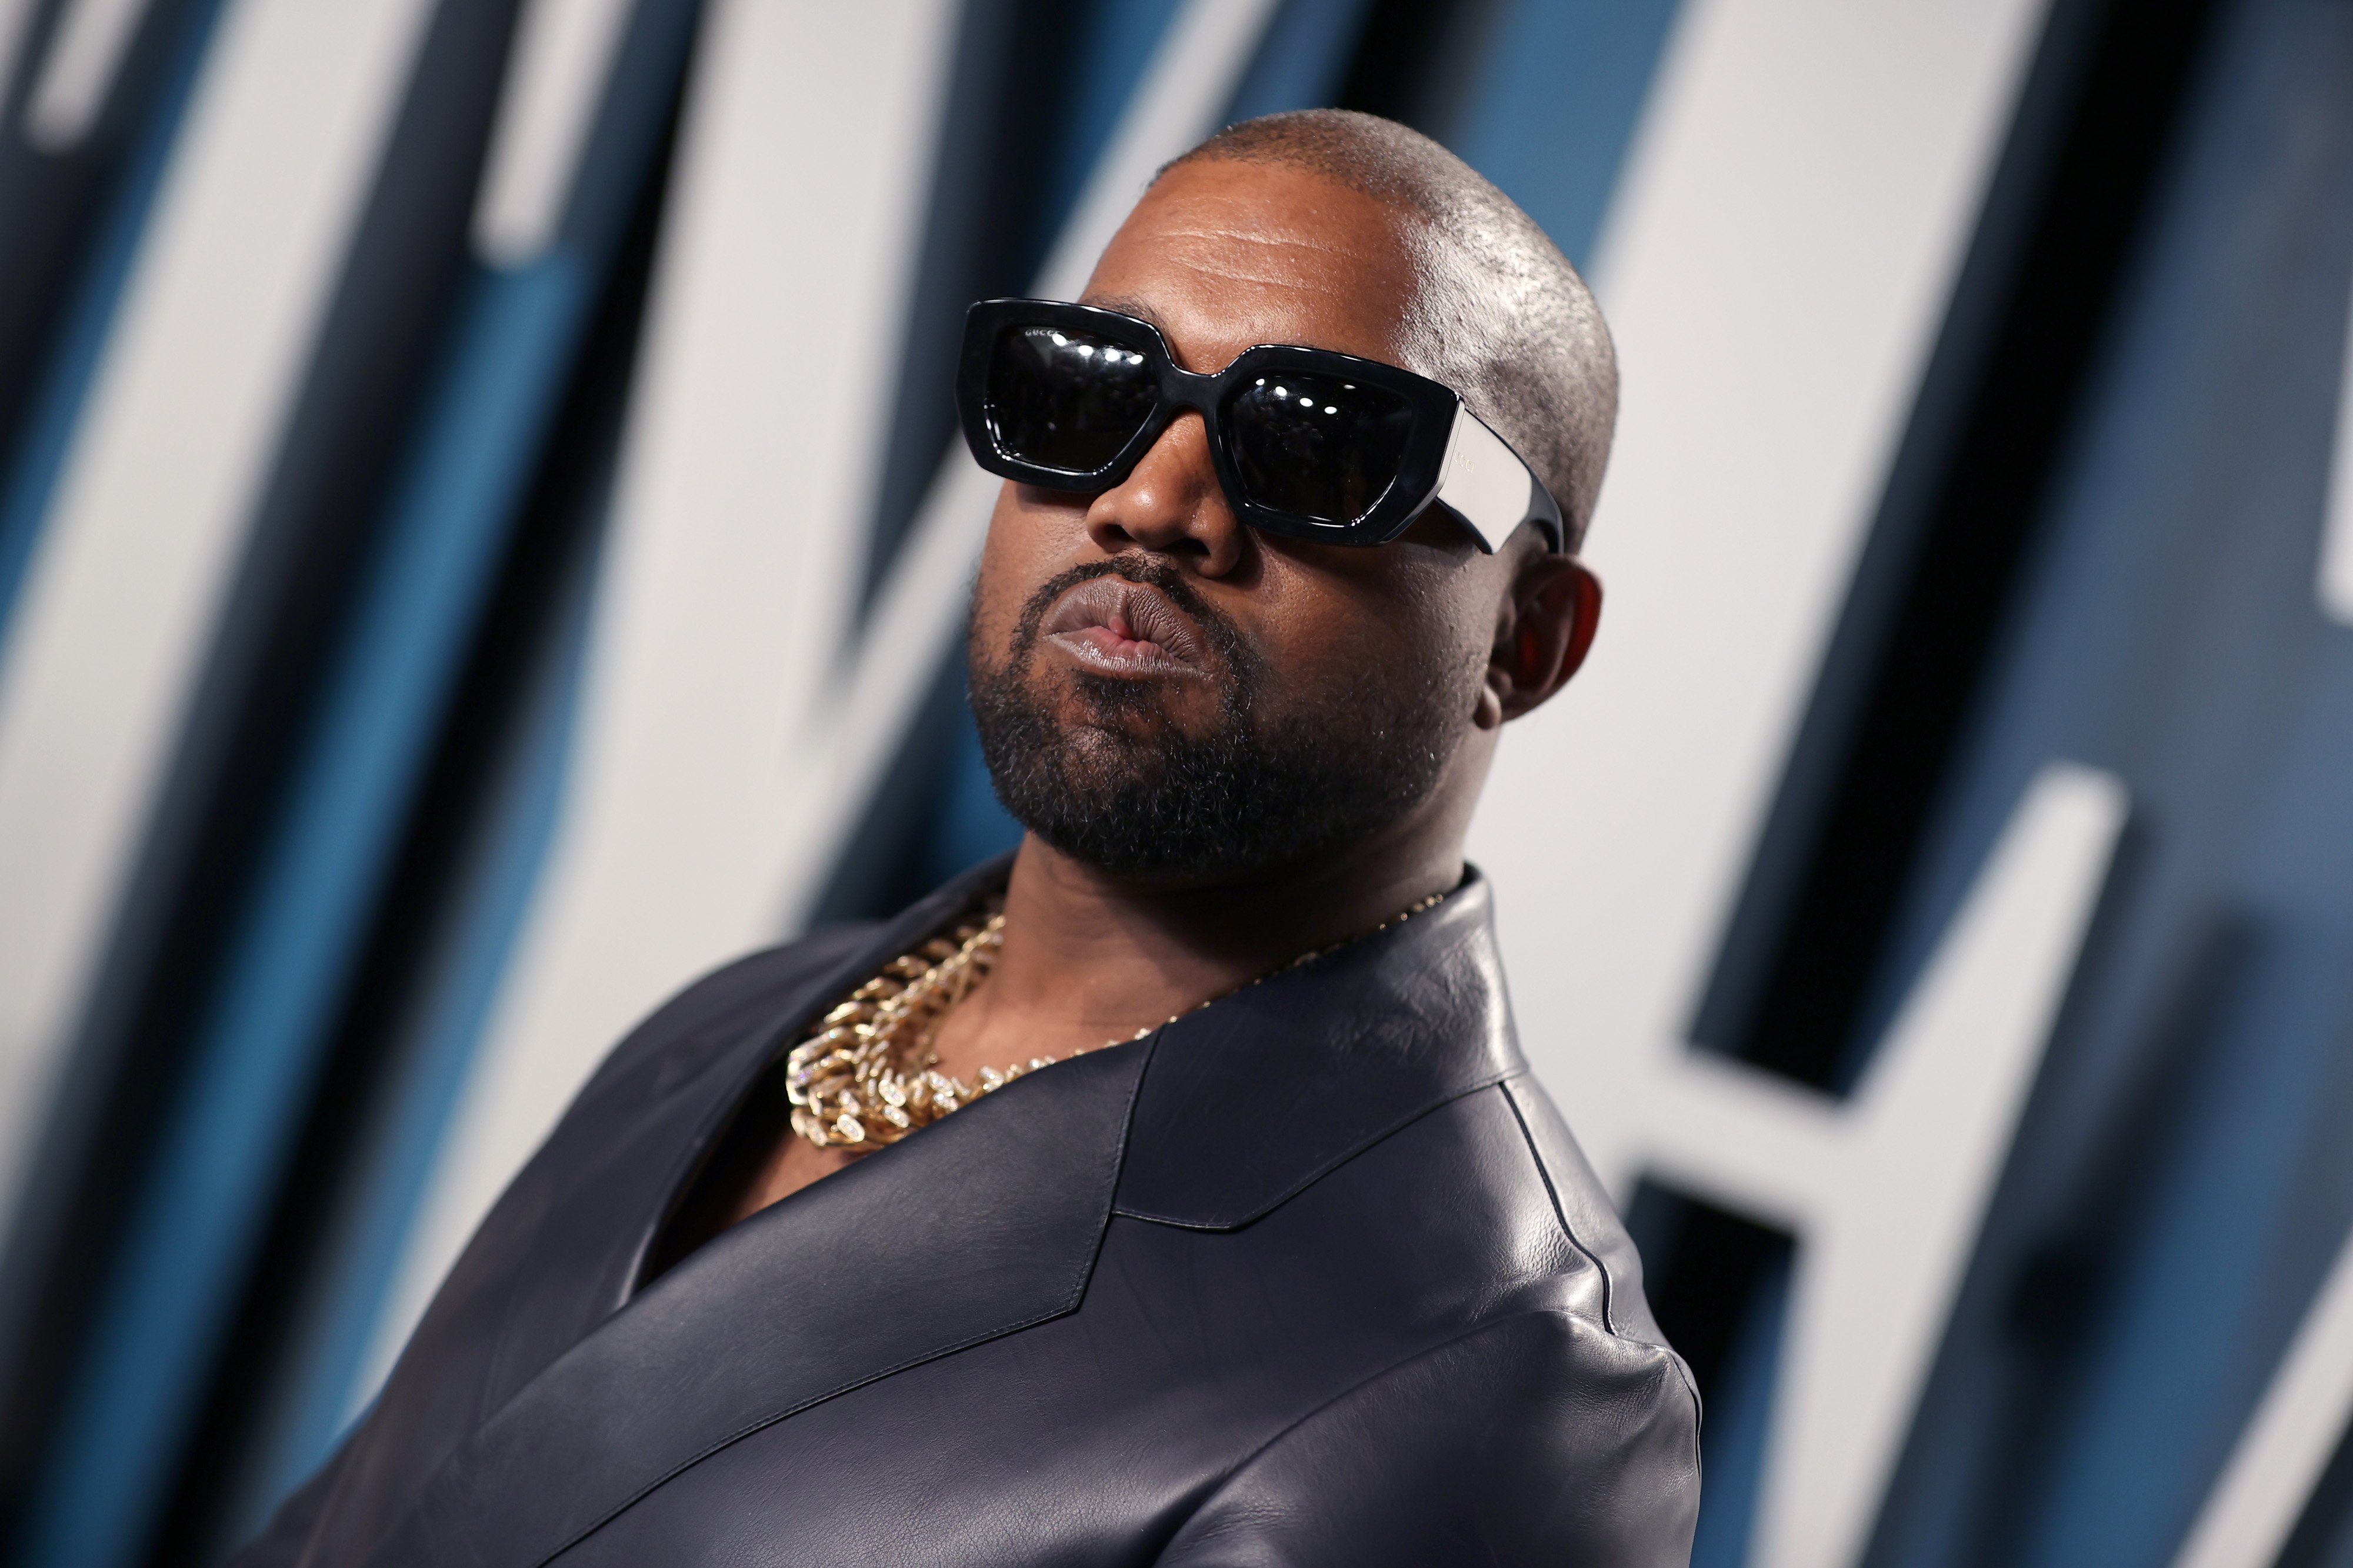 Kanye West photographed in sunglasses at the 2020 Vanity Fair Oscar Party.